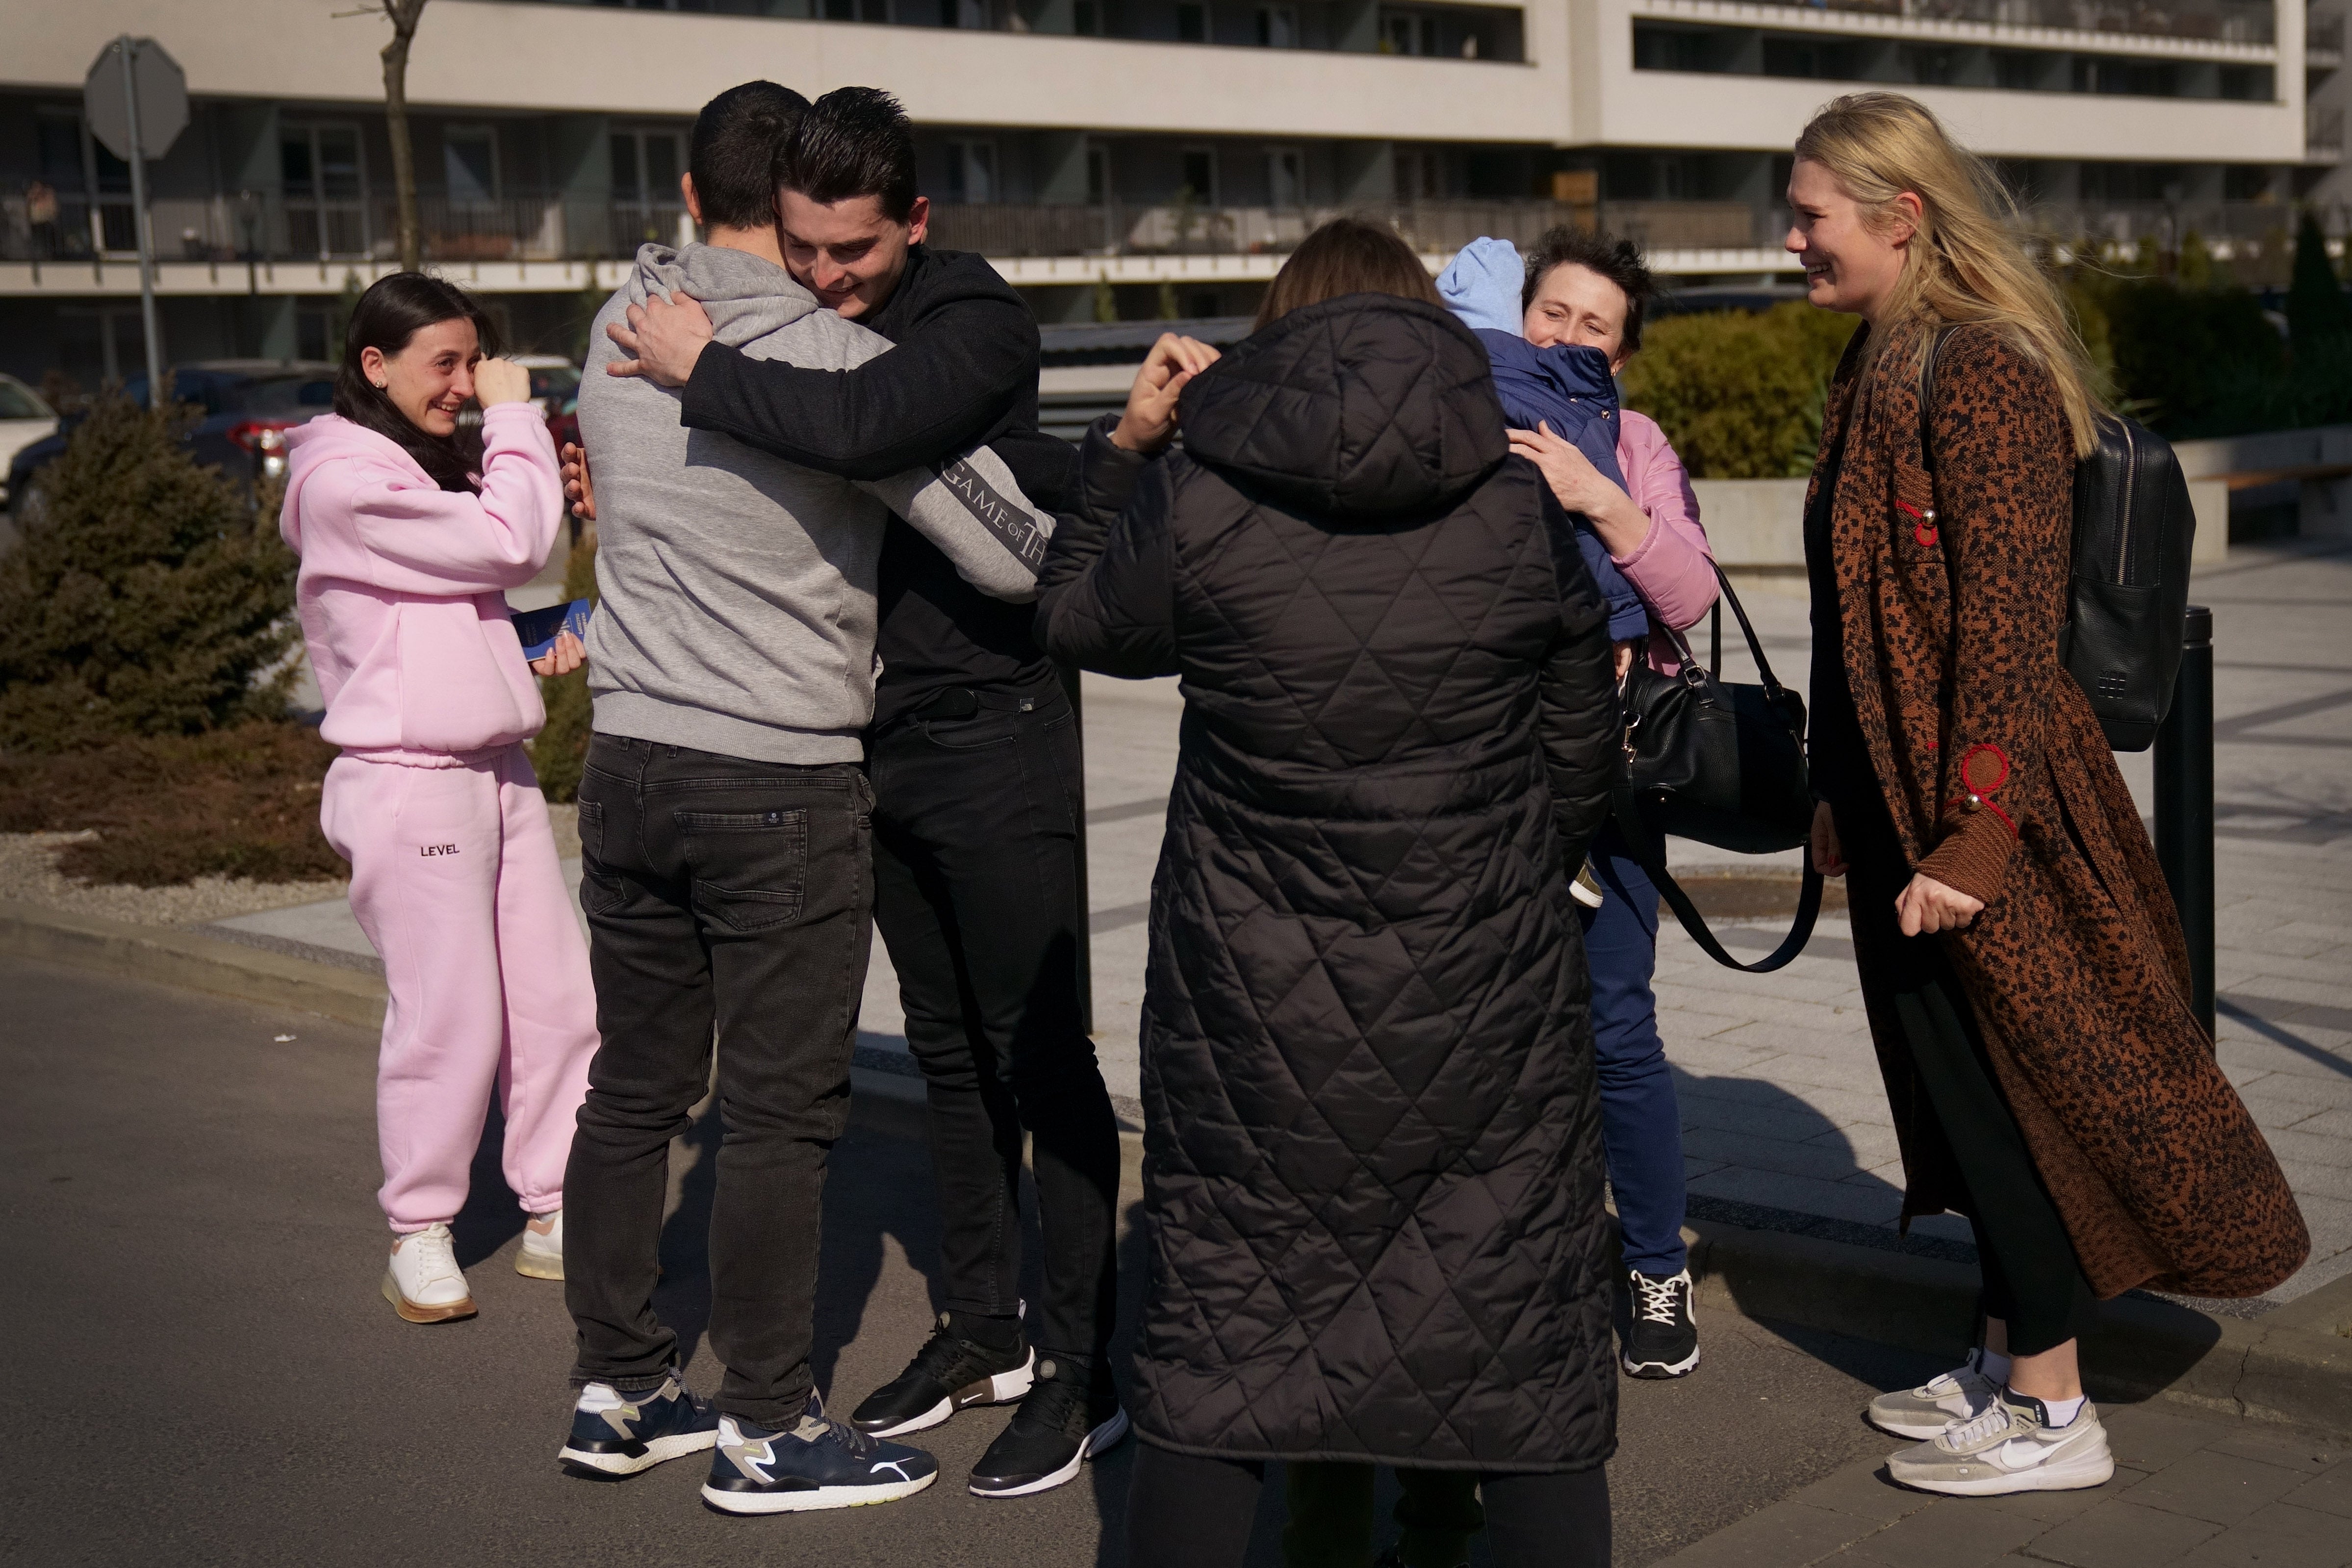 Ukrainian-born Vasyl Kucherka (third left) hugs his brother Misha Kucherka, as his sister, sister-in-law, son, mother, and partner (right) watch on in Rzeszow, Poland